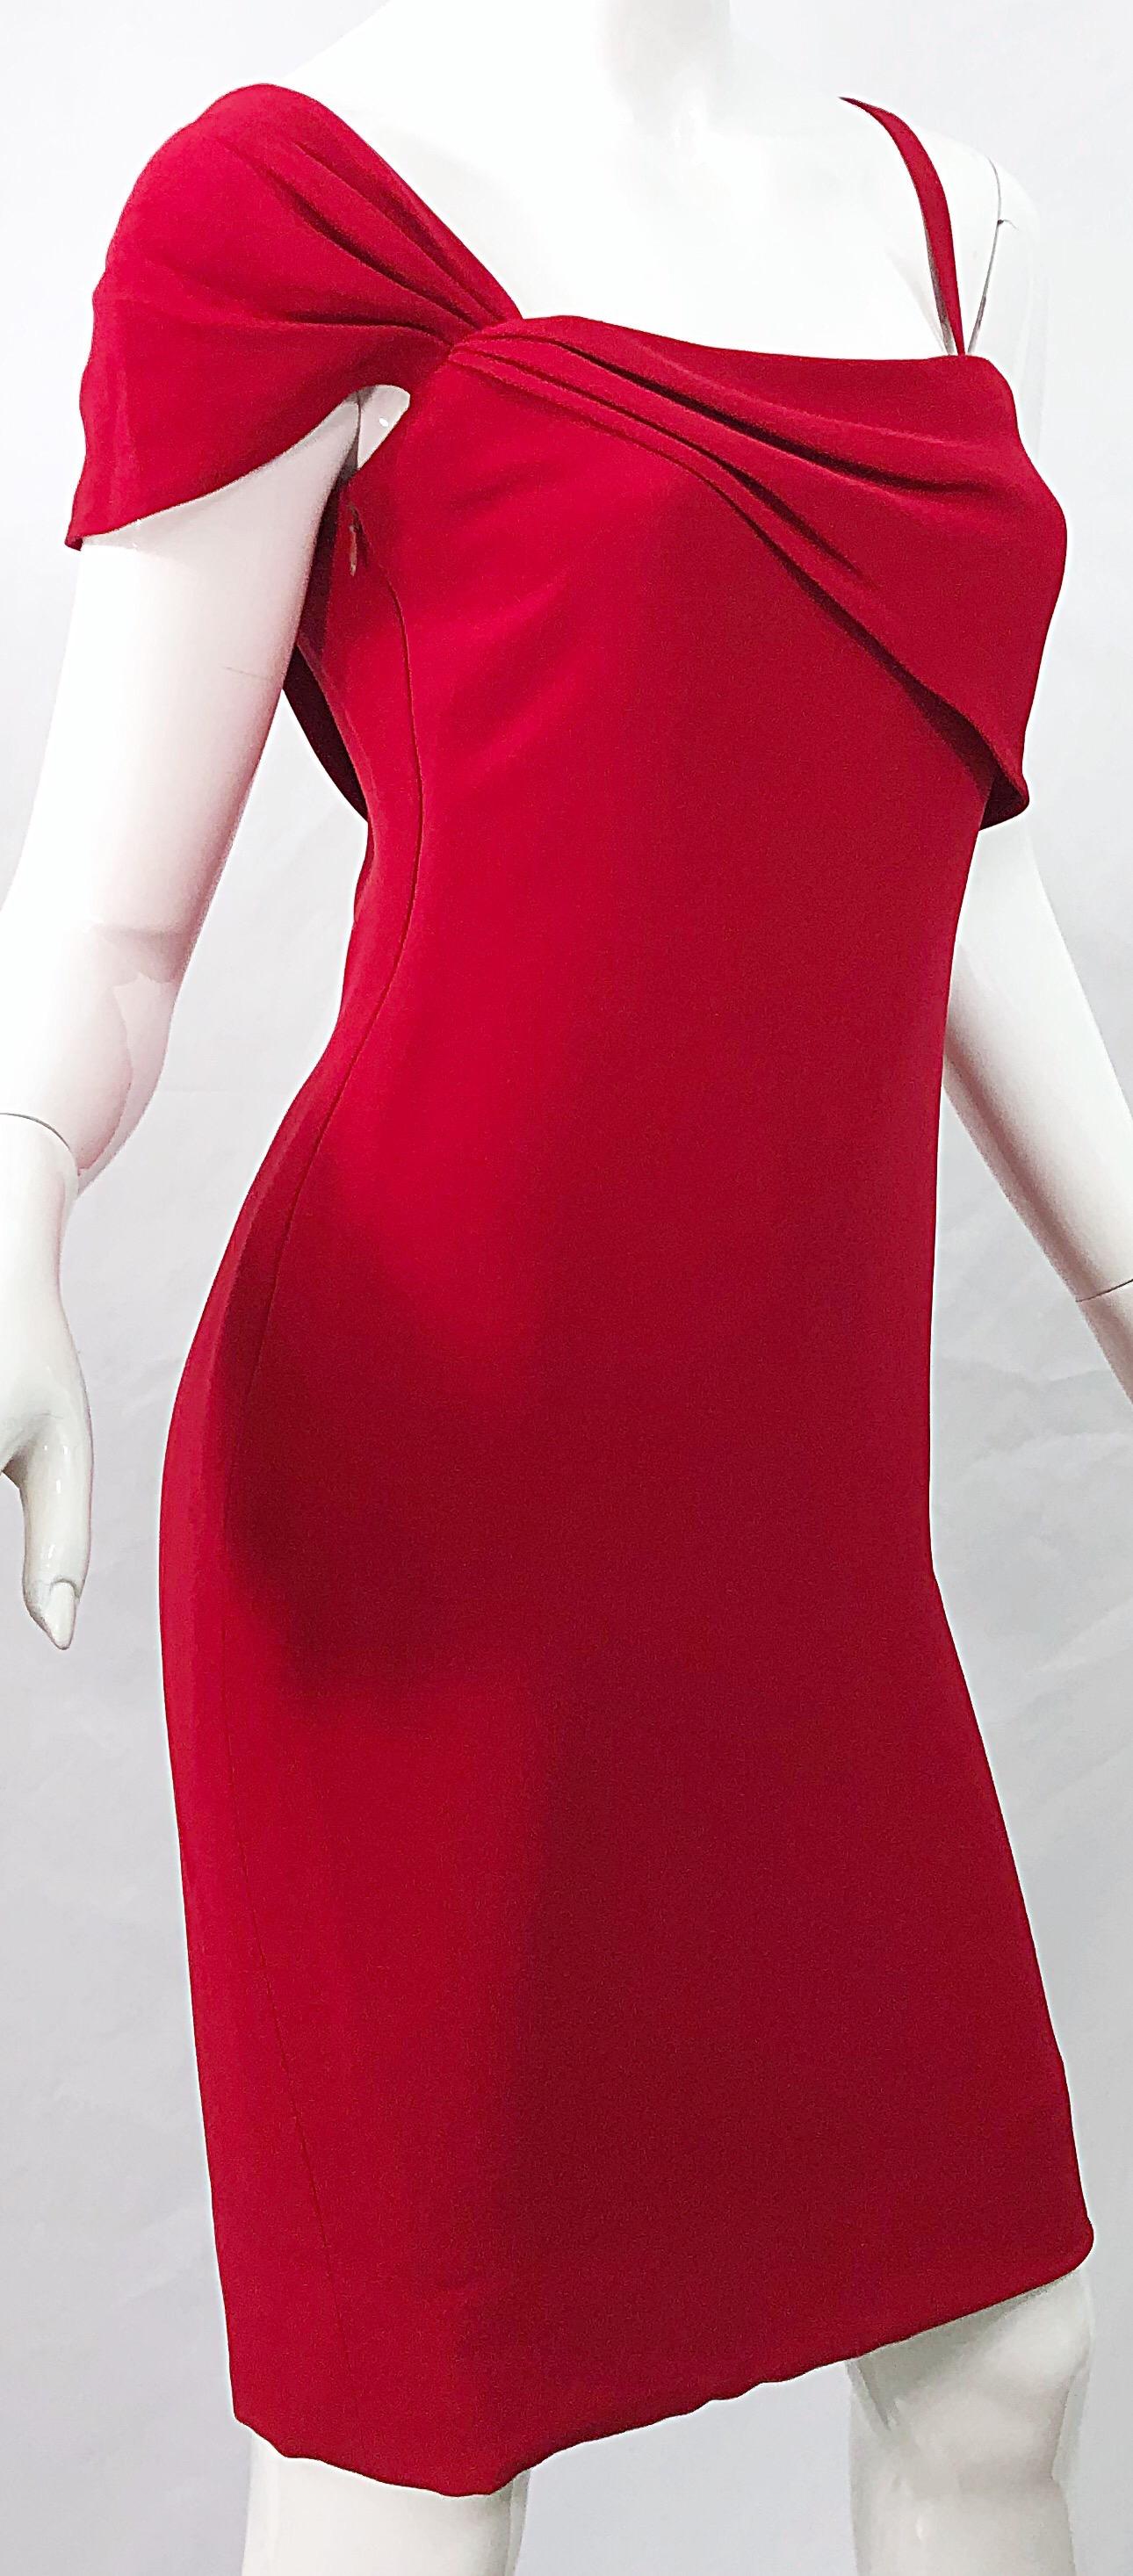 Vintage Bill Blass 1990s Size 6 Lipstick Red One Shoulder 90s Silk Dress In Excellent Condition For Sale In San Diego, CA